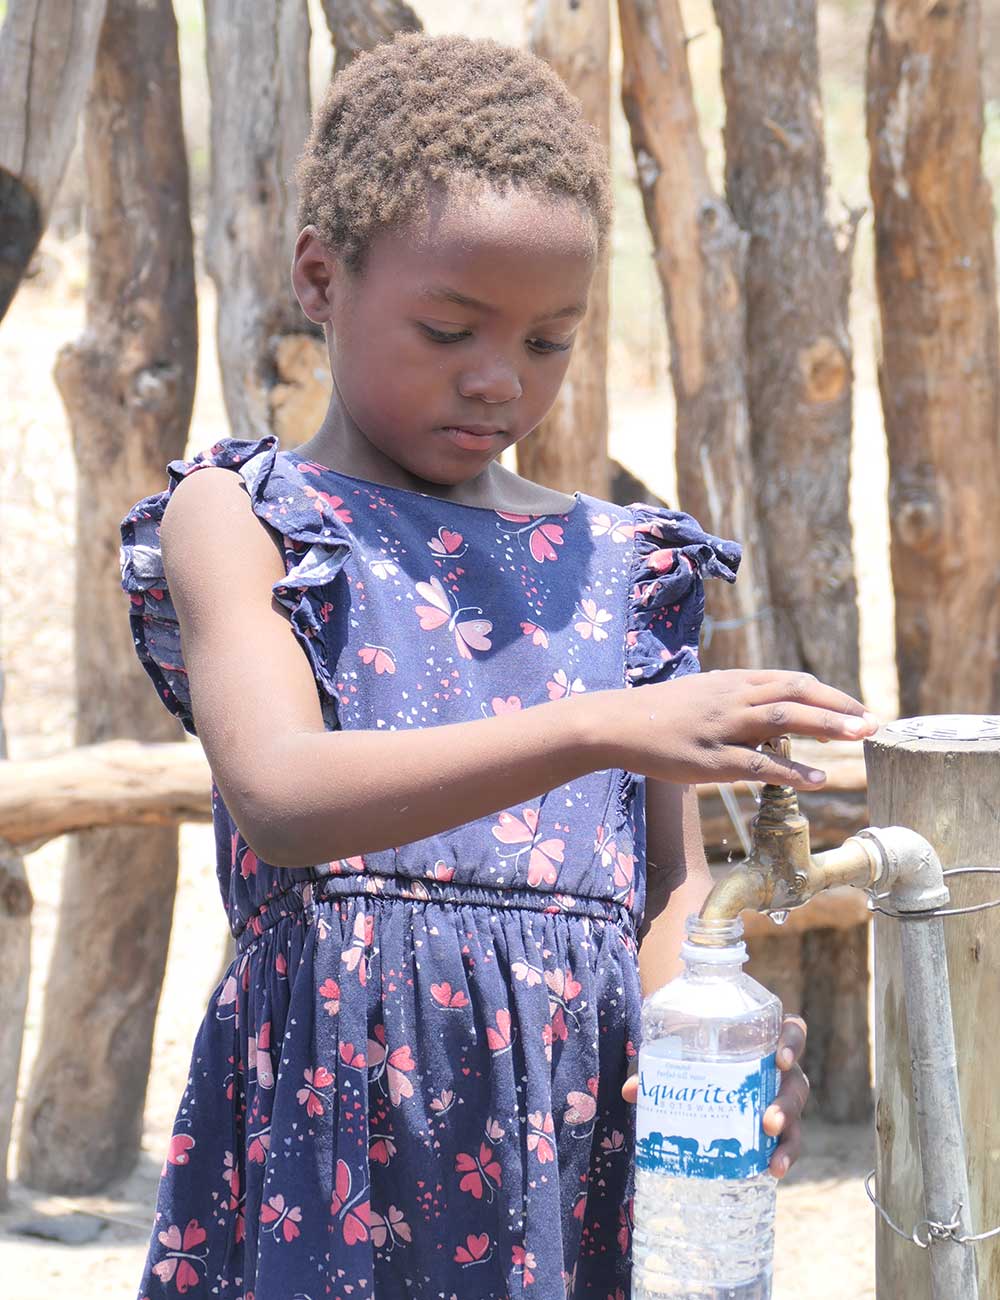 Three freshwater wells now provide clean, safe drinking water to local communities.